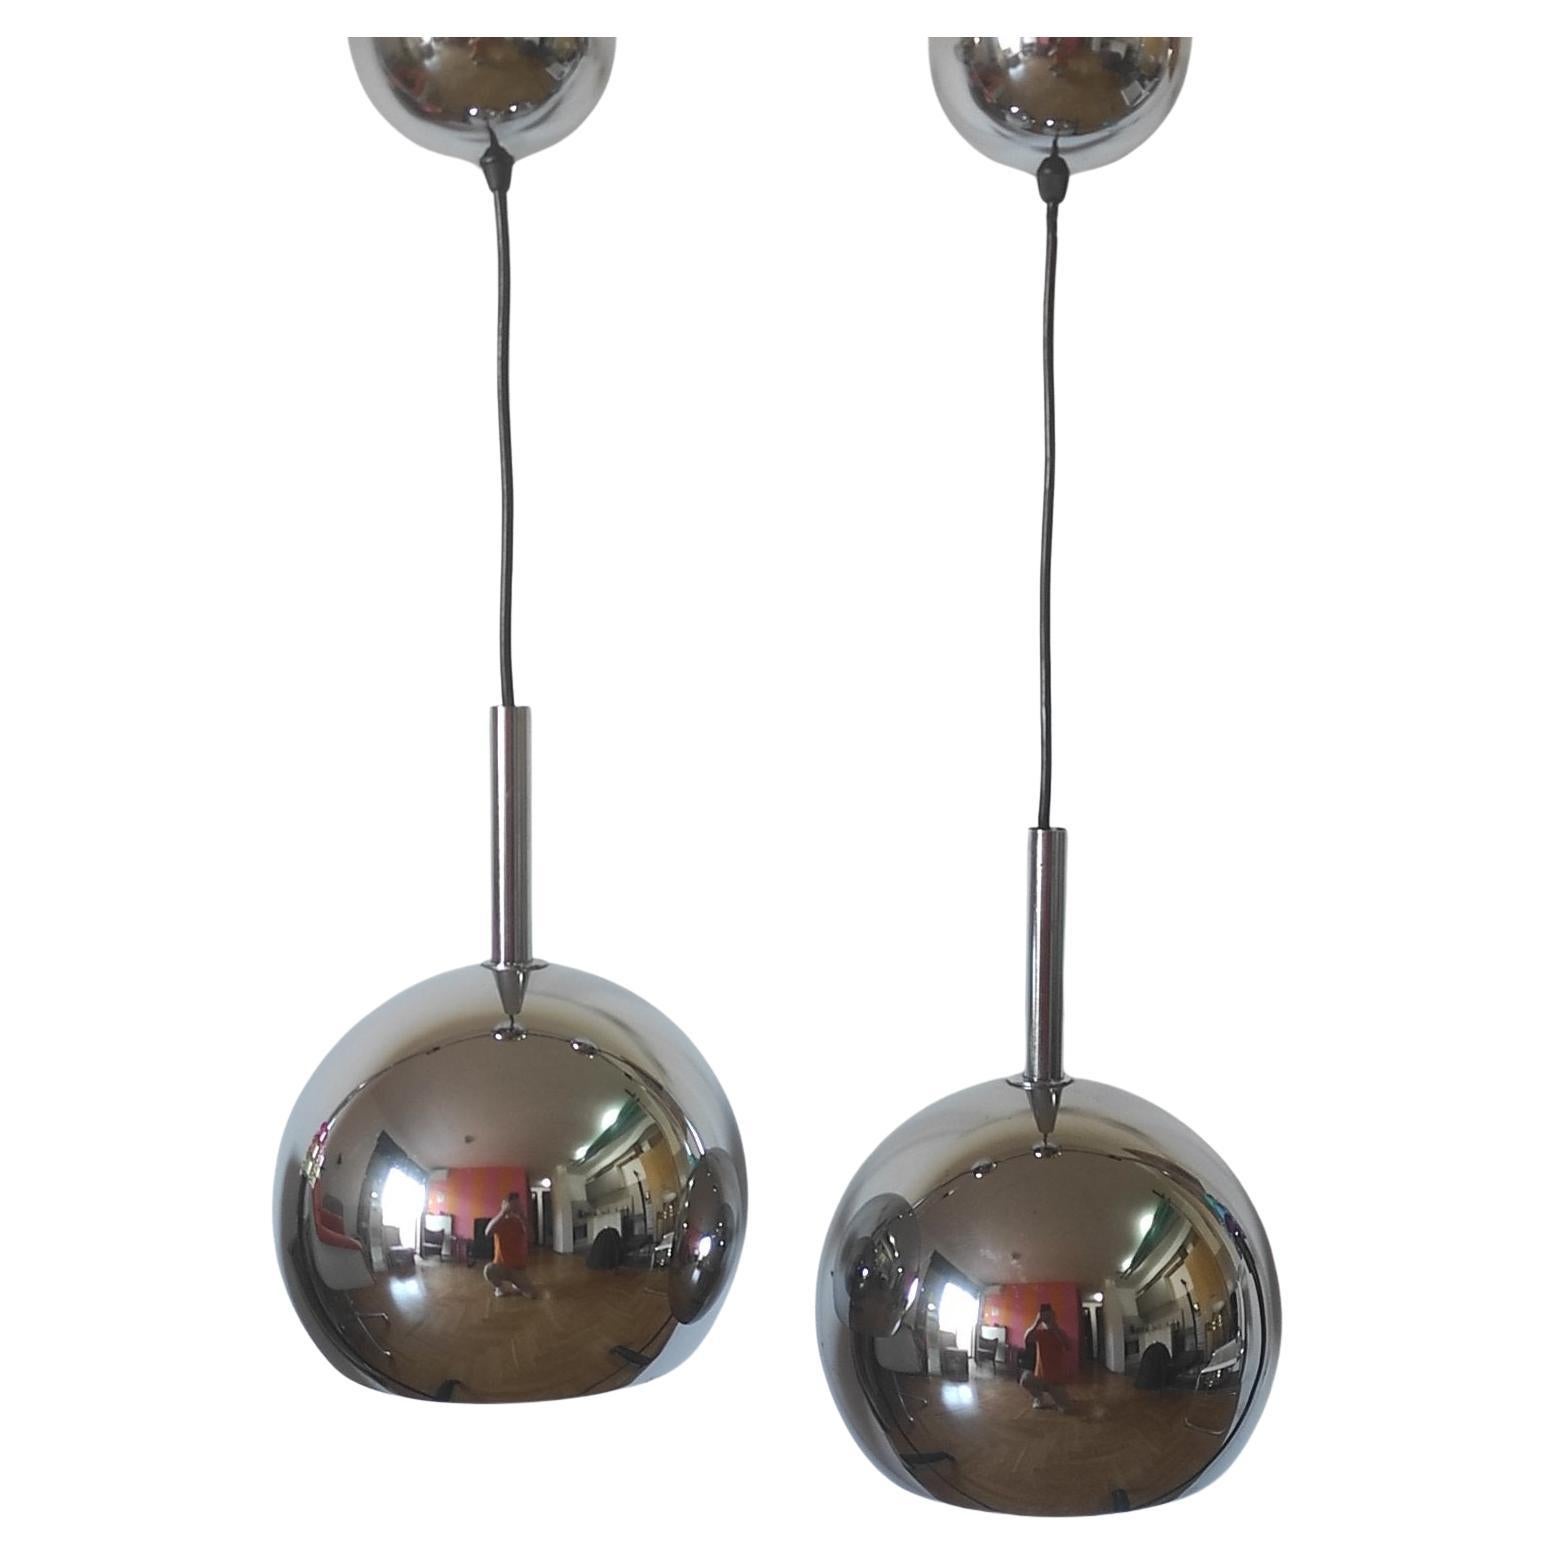 One of Two Space Age Chrome Ball Pendant By Guzzini Italy 1970s For Sale